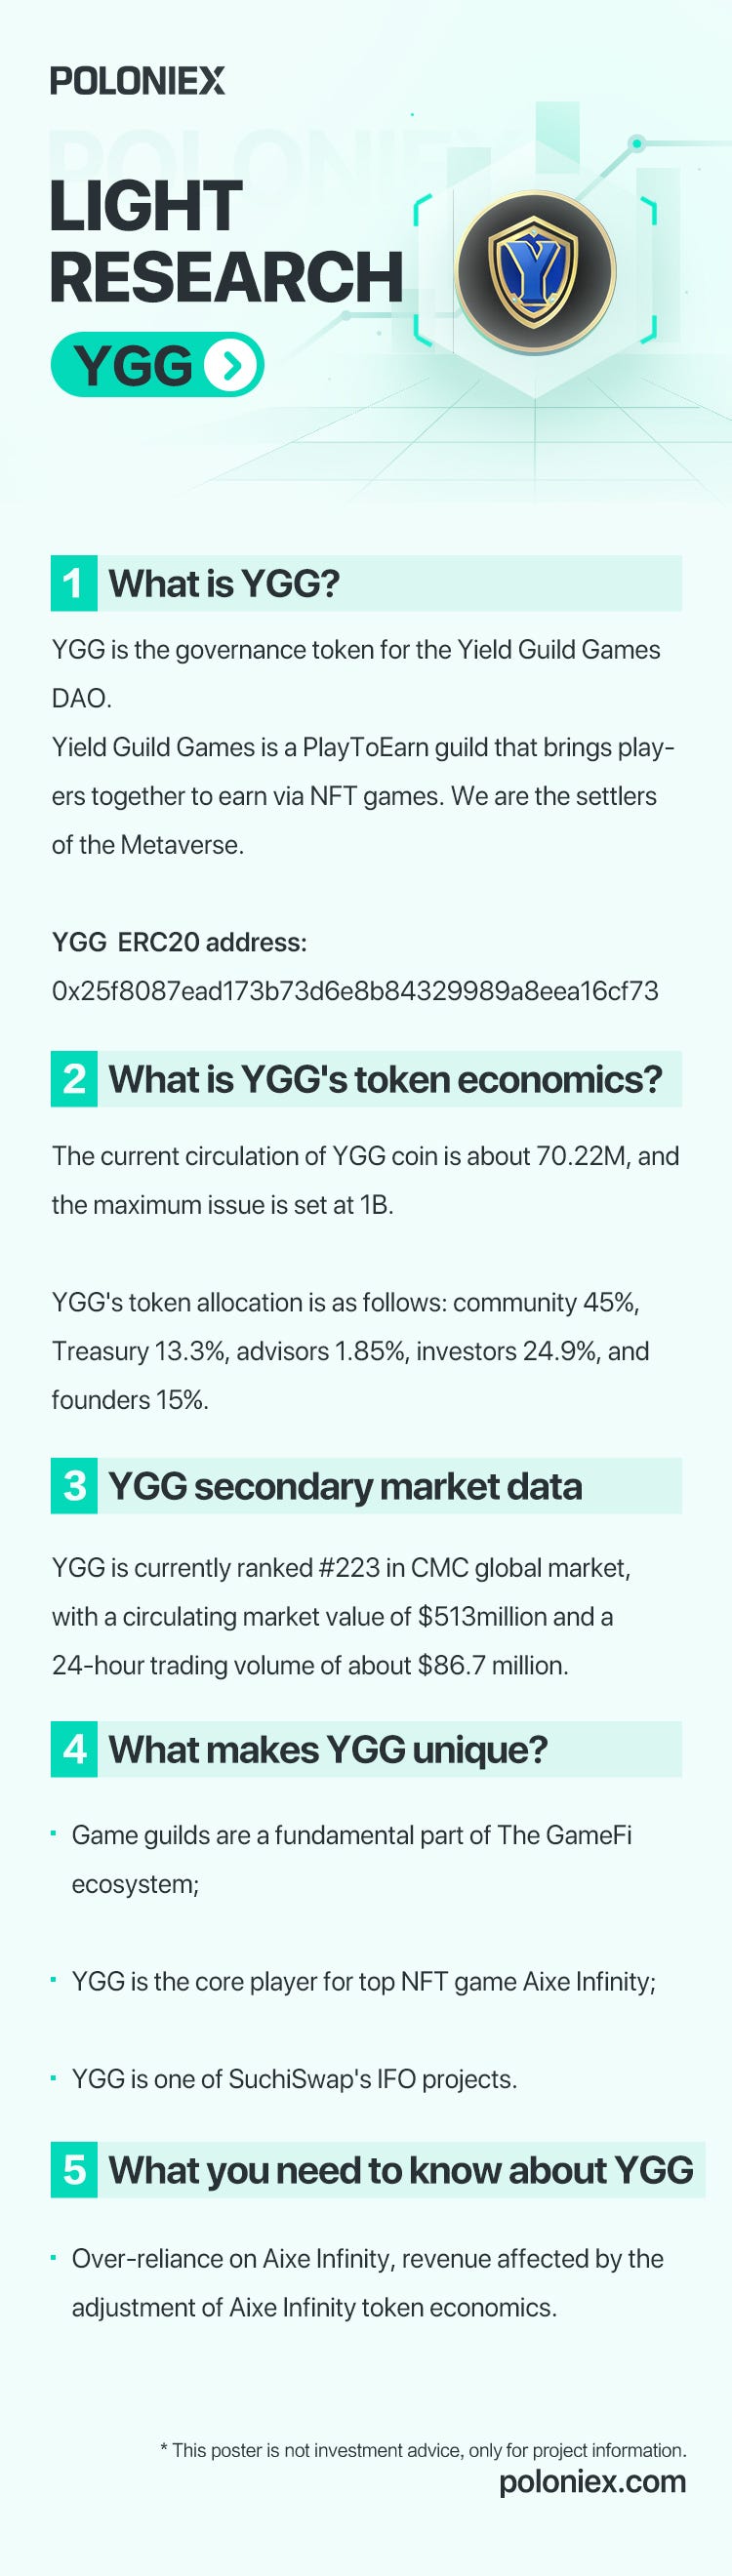 Poloniex Project Light Research-Yield Guild Game (YGG)Cryptocurrency Trading Signals, Strategies & Templates | DexStrats